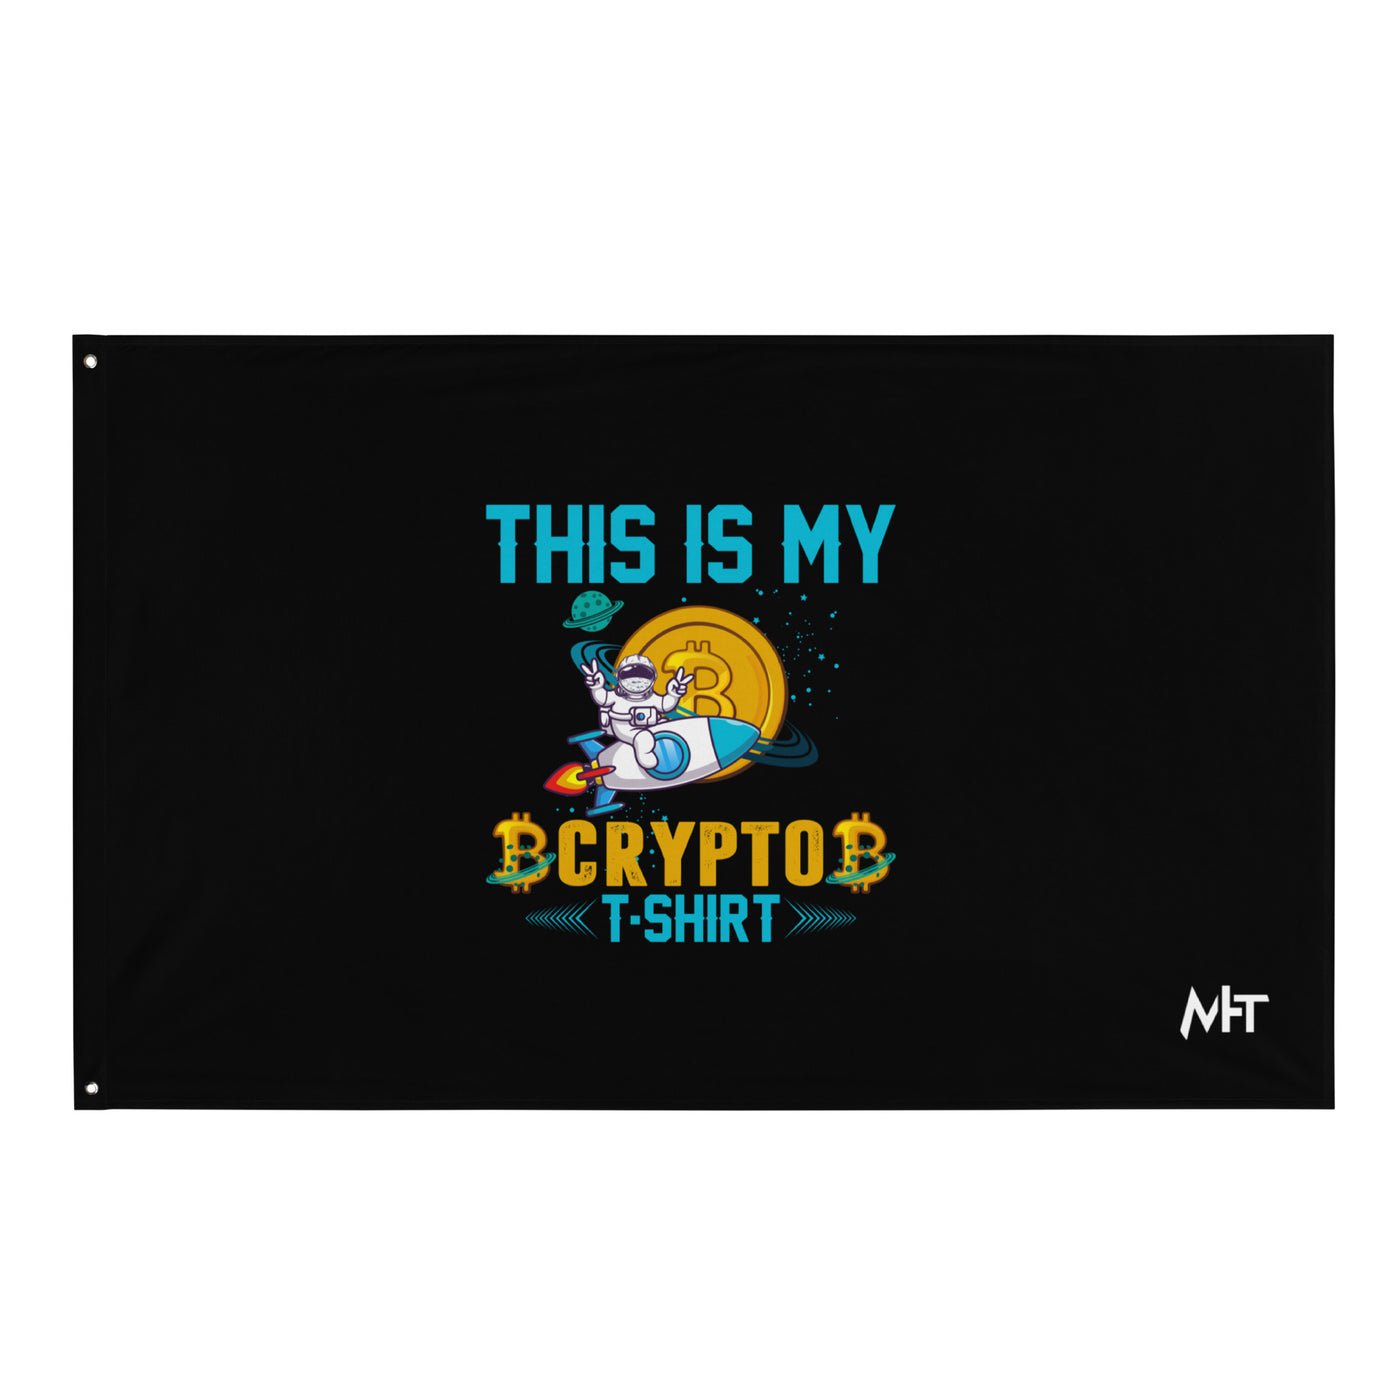 This is my Crypto T-shirt with Turtle Ninja and Missile - Flag